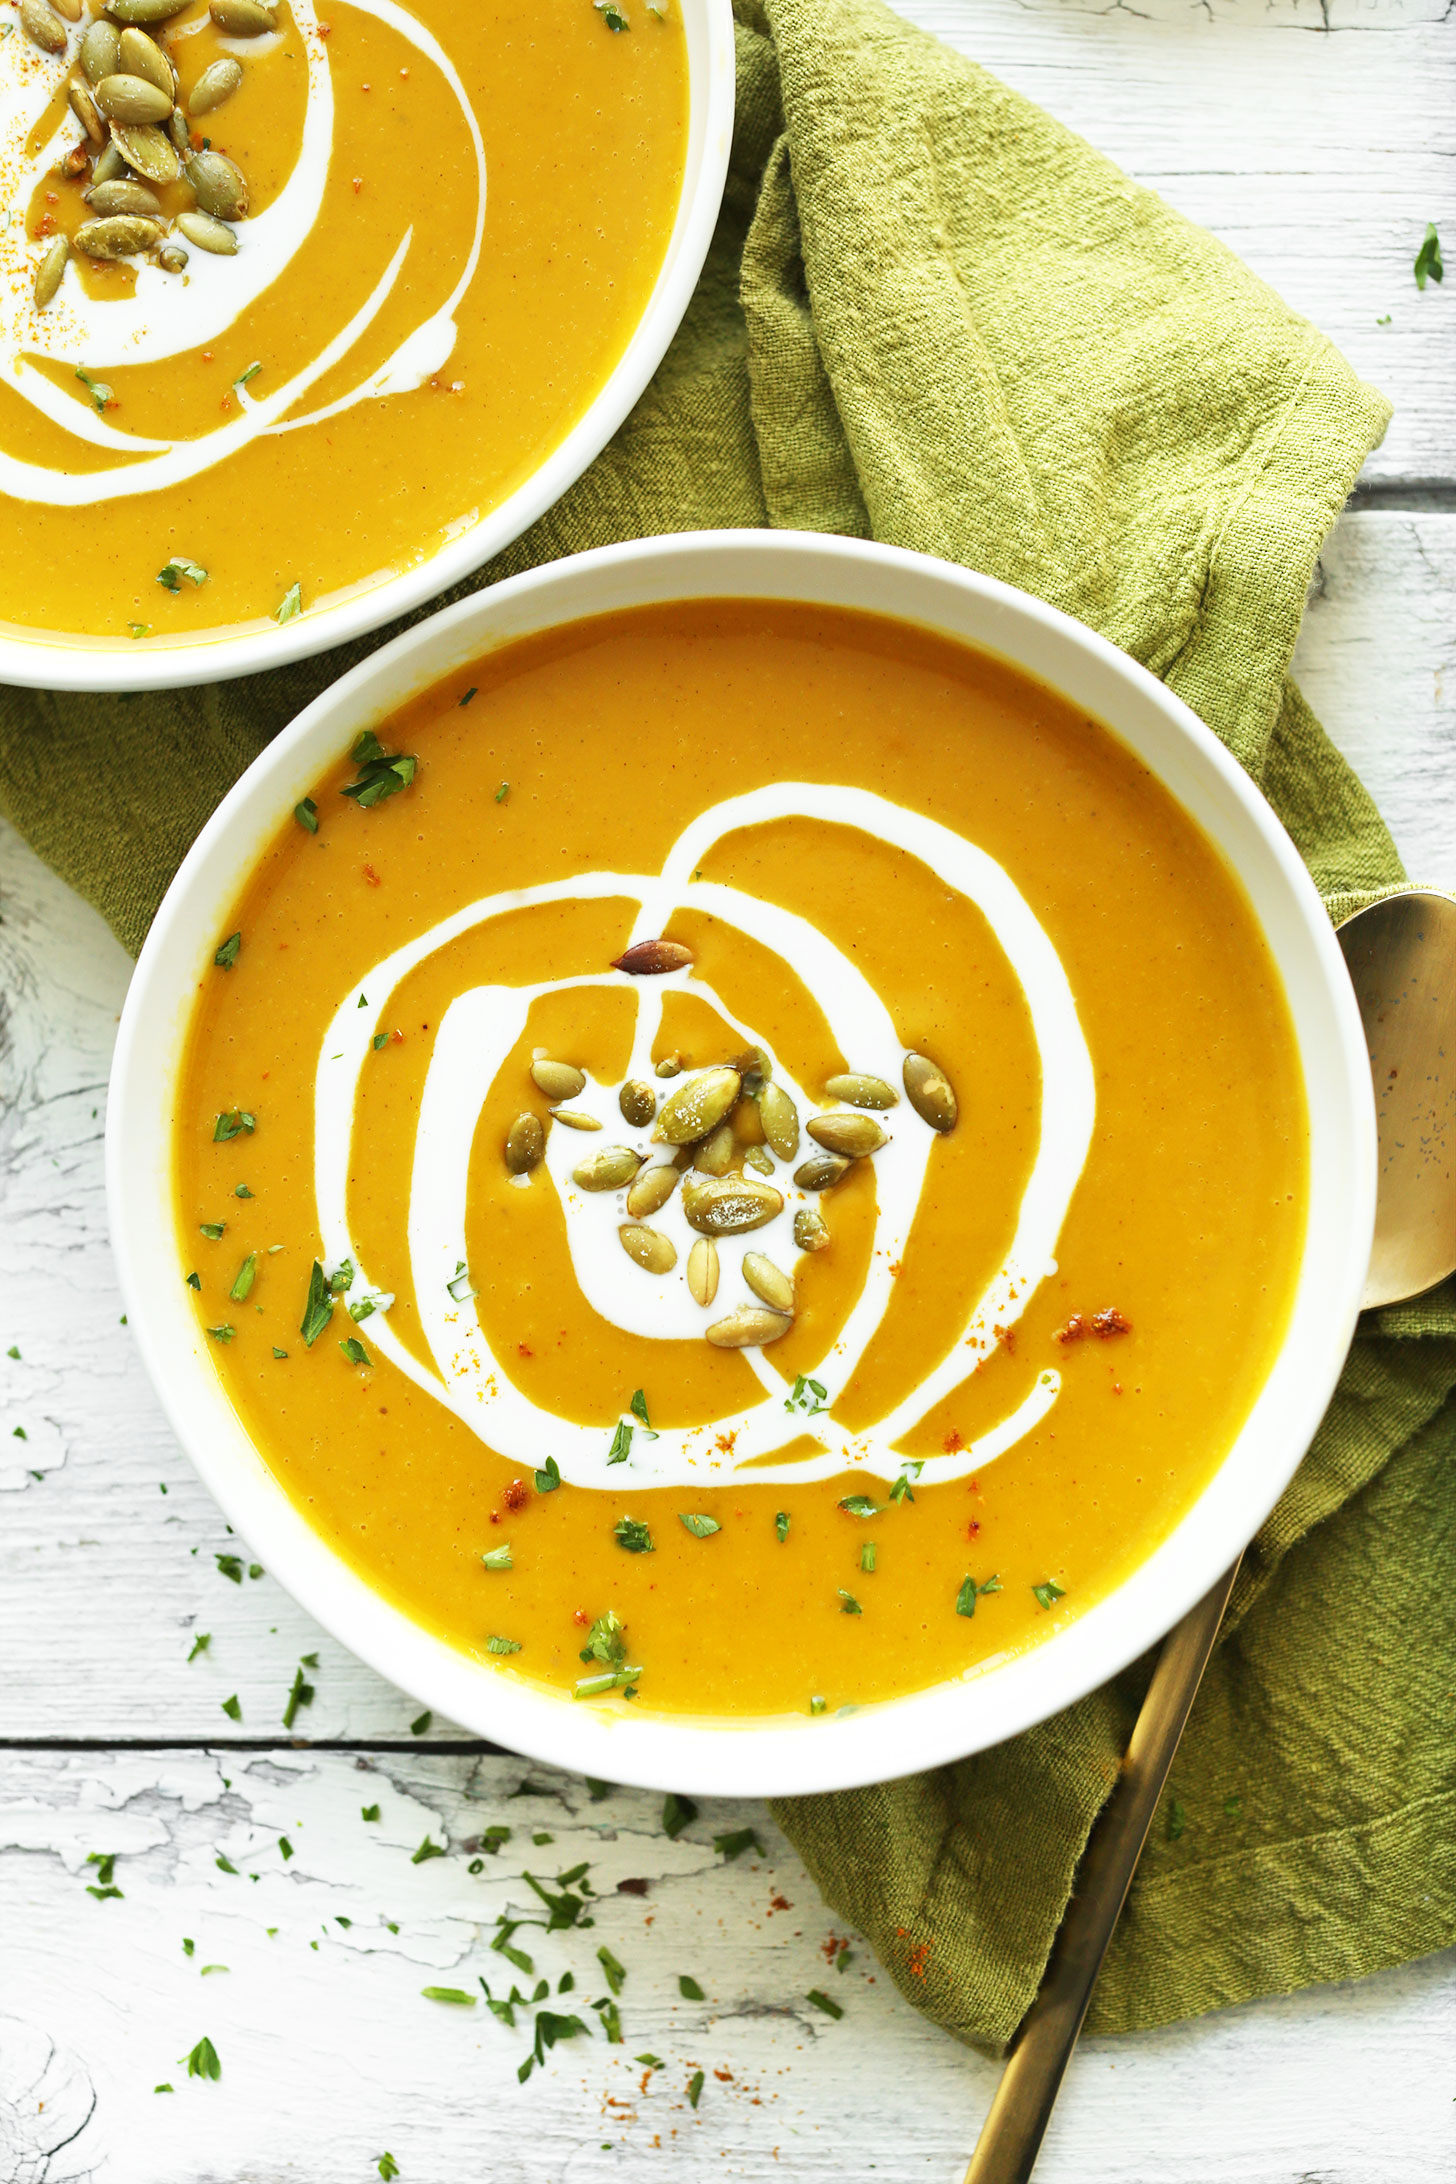 https://thesweetpotato.ca/wp-content/uploads/2019/09/Curry-Buttercup-Squash-Soup.jpg